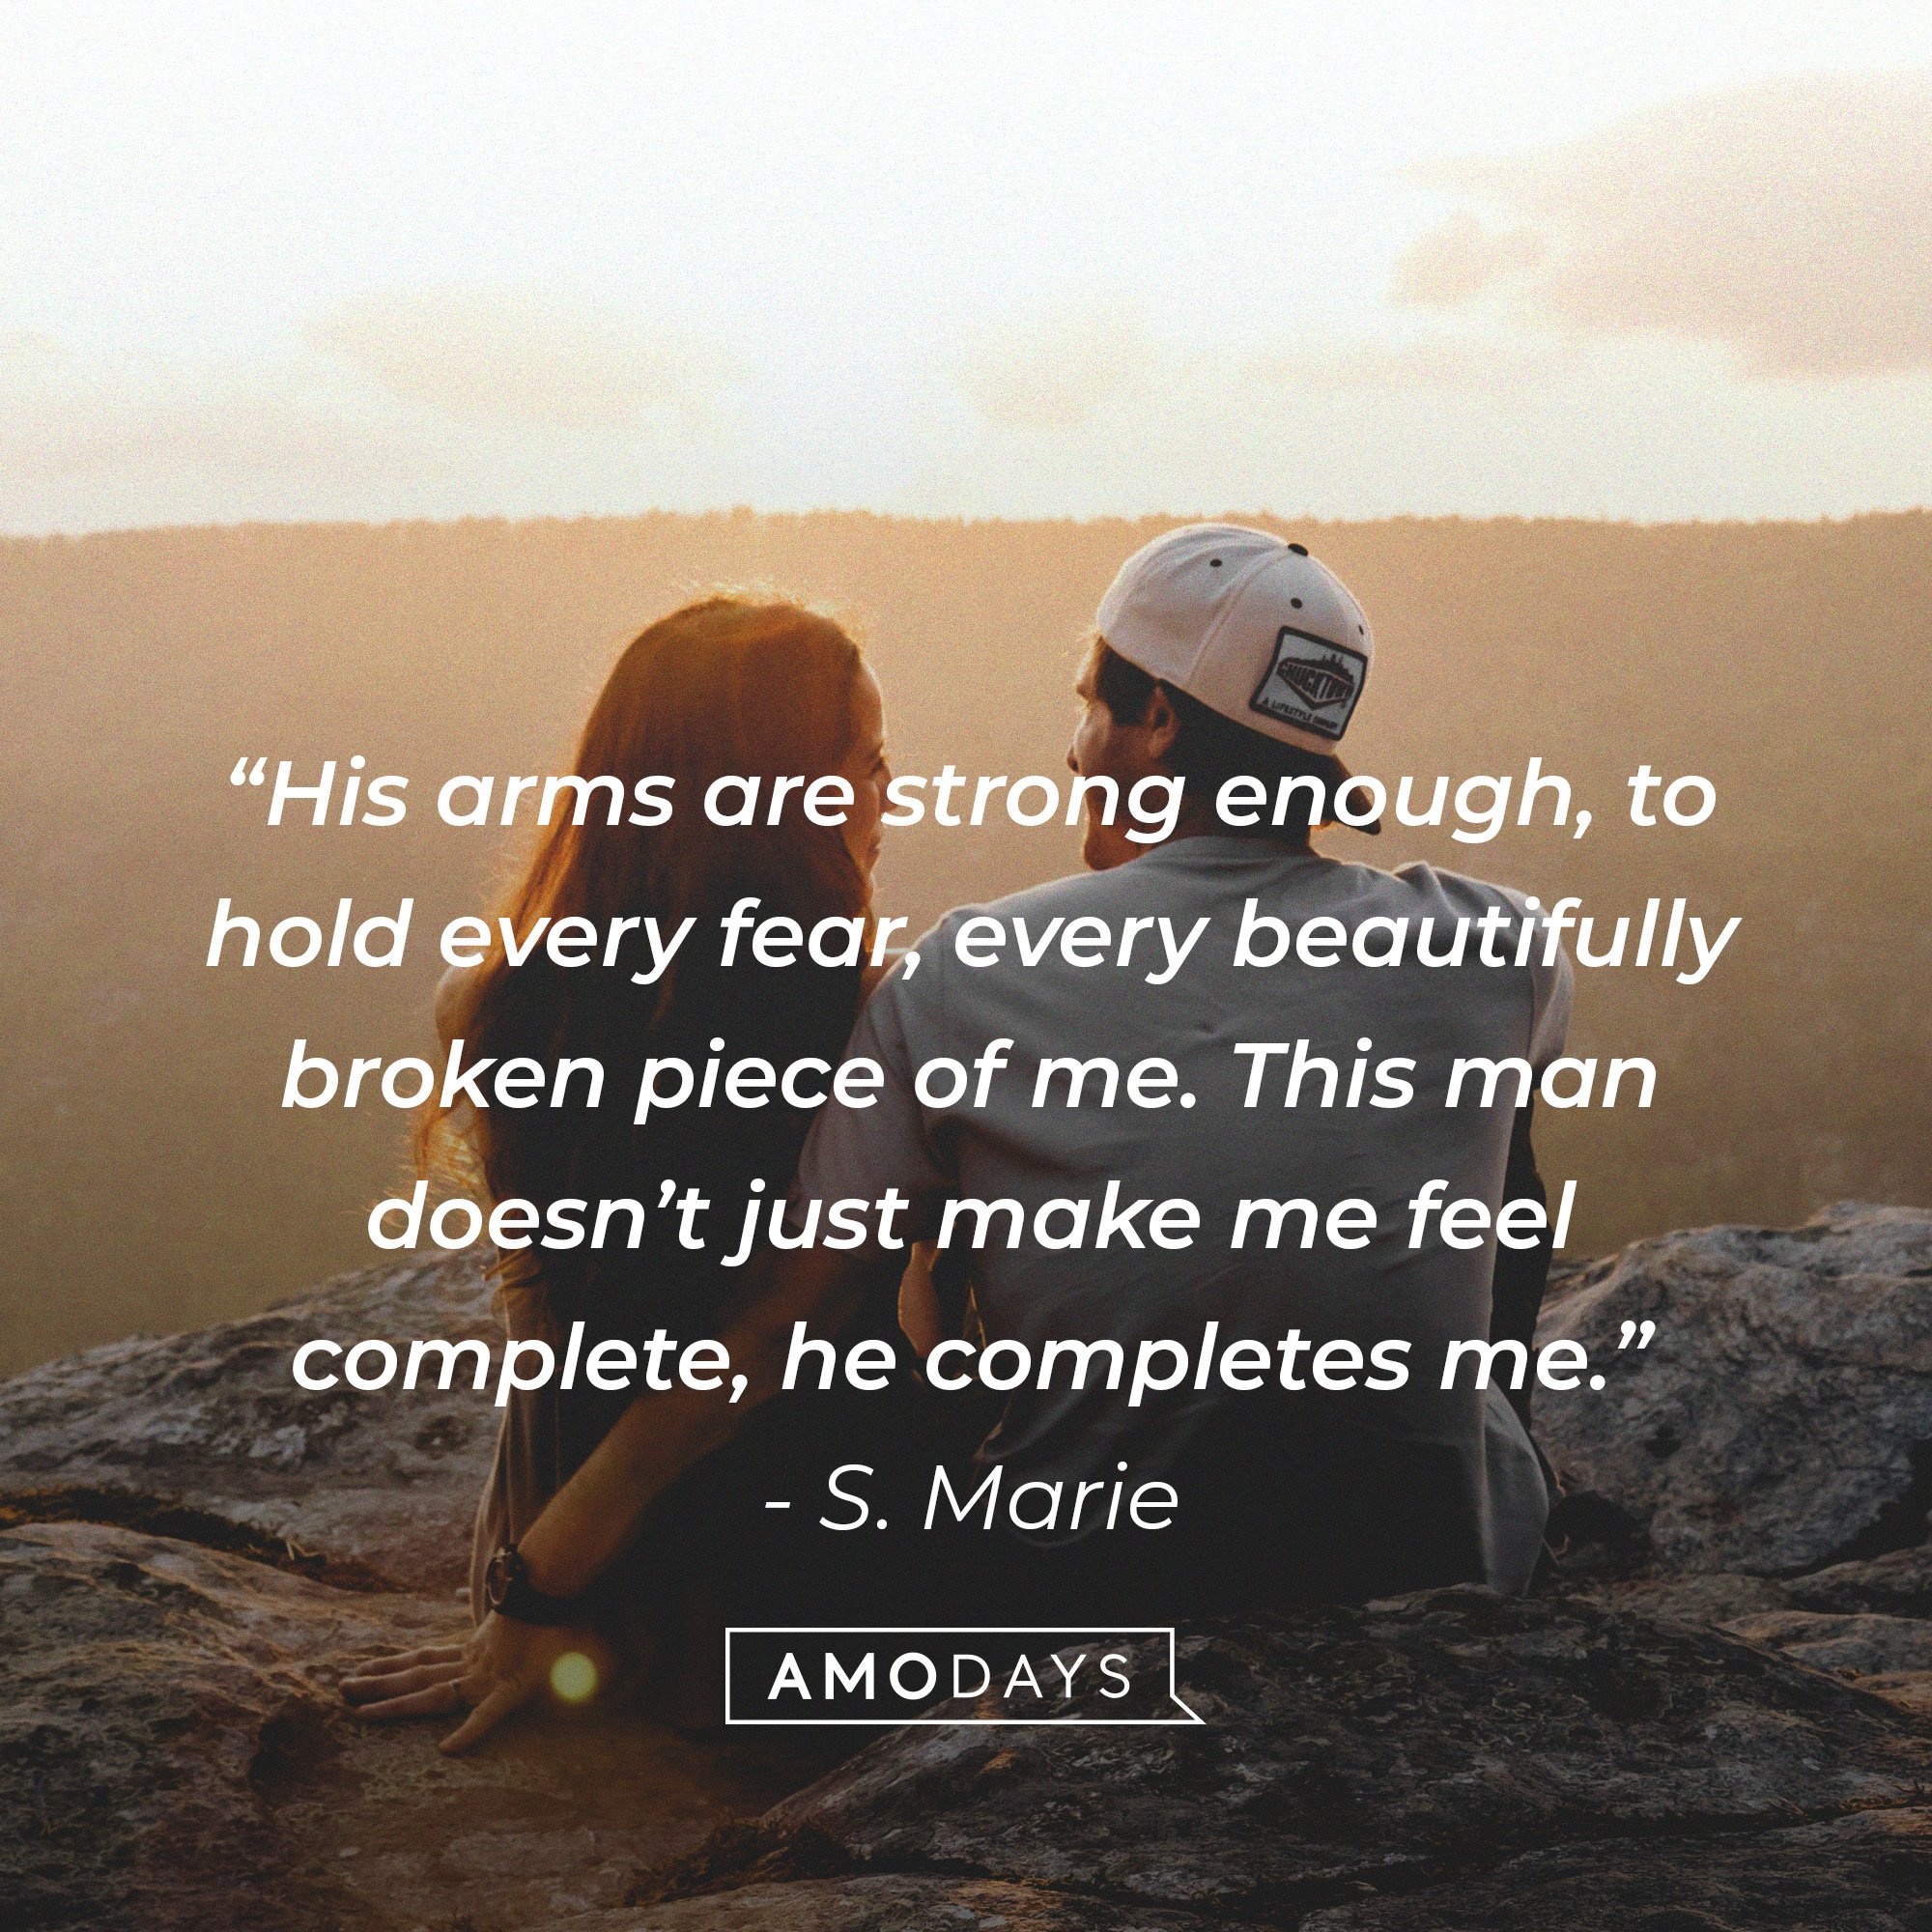 S. Marie's: “His arms are strong enough, to hold every fear, every beautifully broken piece of me. This man doesn’t just make me feel complete, he completes me.” — Image: AmoDays 